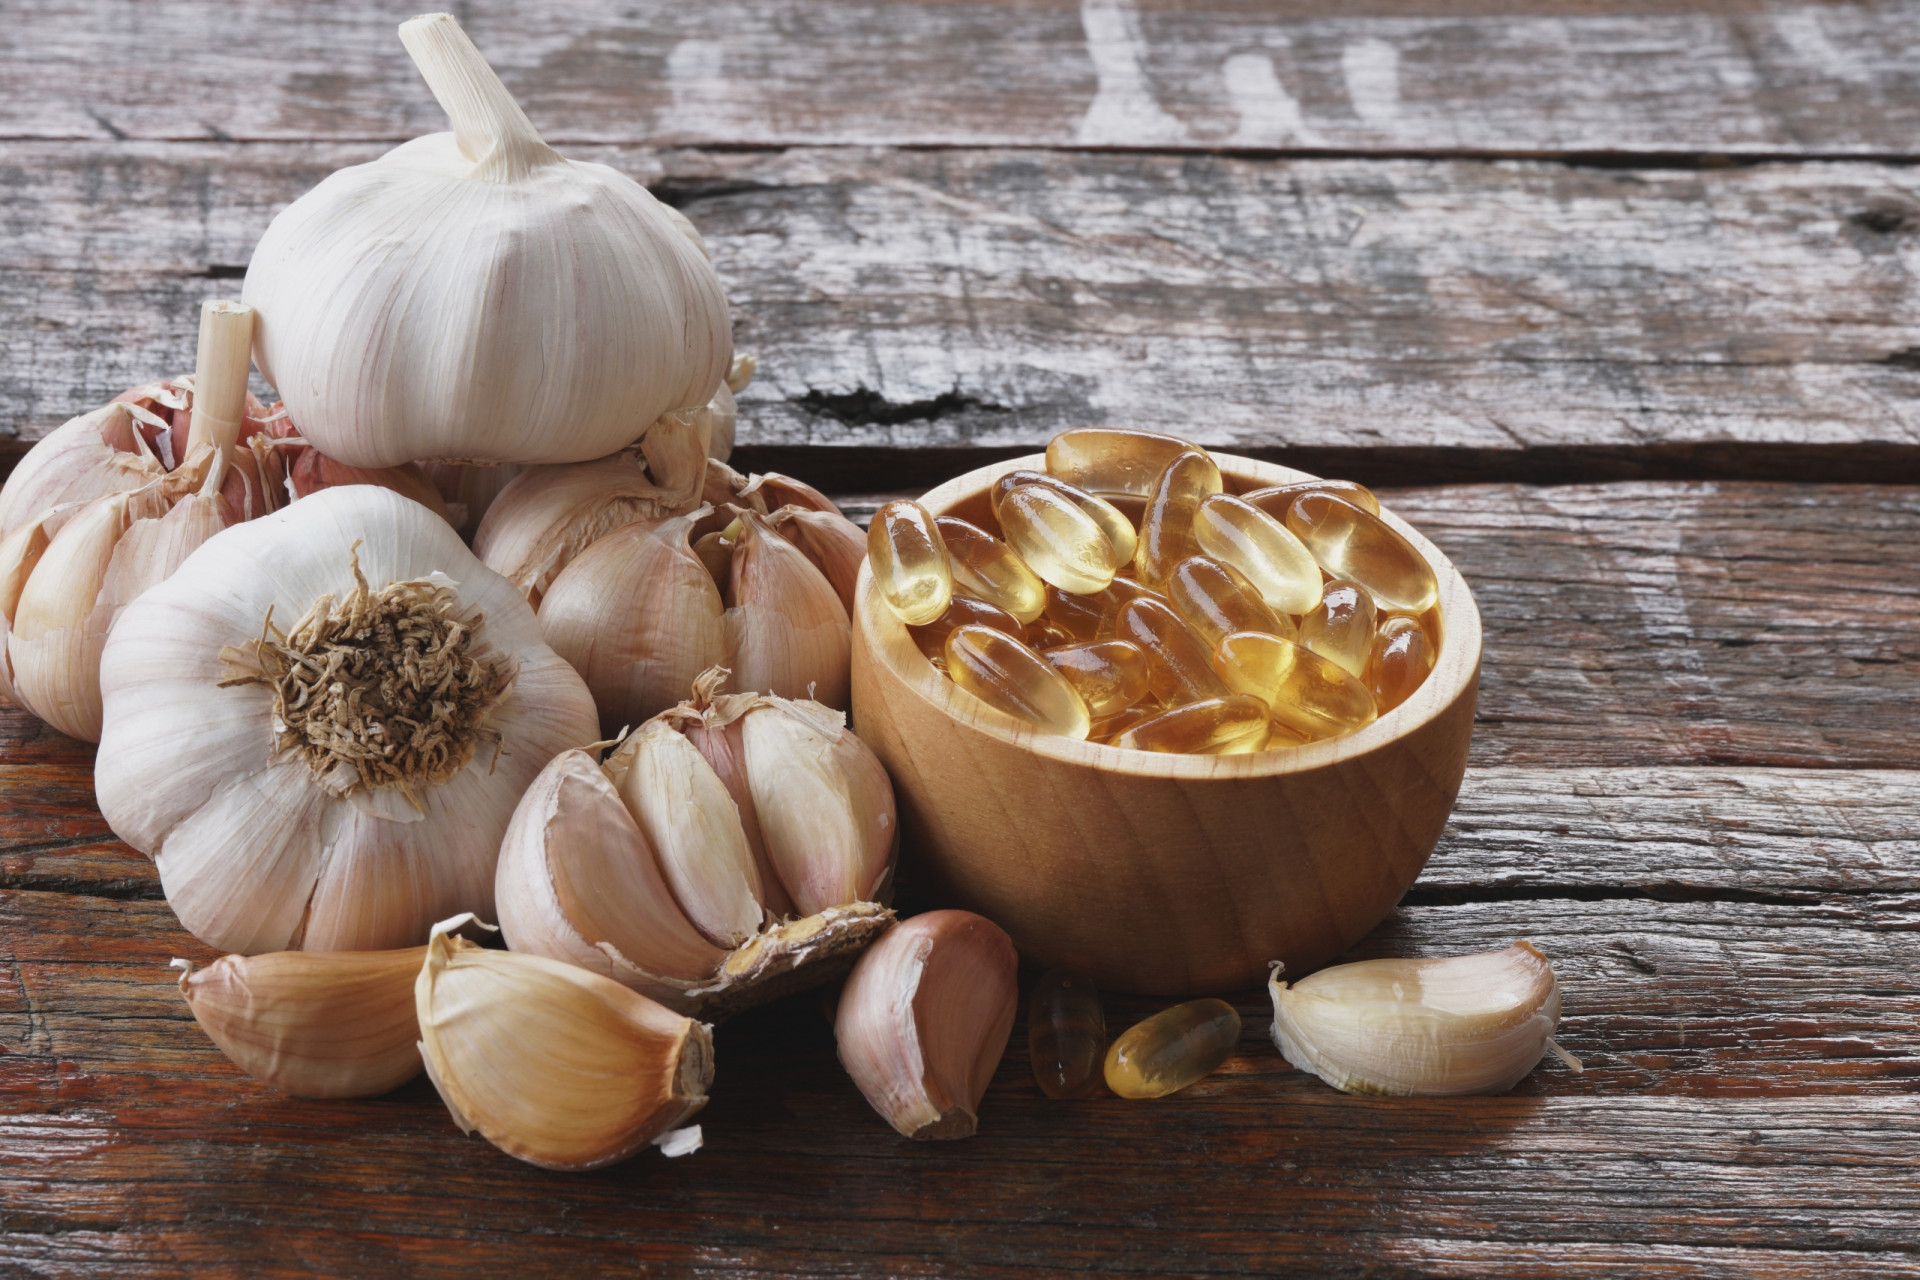 <p>Garlic (<em>allium sativum</em>) can interact with paracetamol and decrease blood concentrations of warfarin. It can also cause hypoglycemia when taken with chlorpropamide. Garlic may also decrease the blood levels of HIV protease inhibitors.</p><p>You may also like:<a href="https://www.starsinsider.com/n/178190?utm_source=msn.com&utm_medium=display&utm_campaign=referral_description&utm_content=556697en-en"> Wedding dress trends for 2018</a></p>